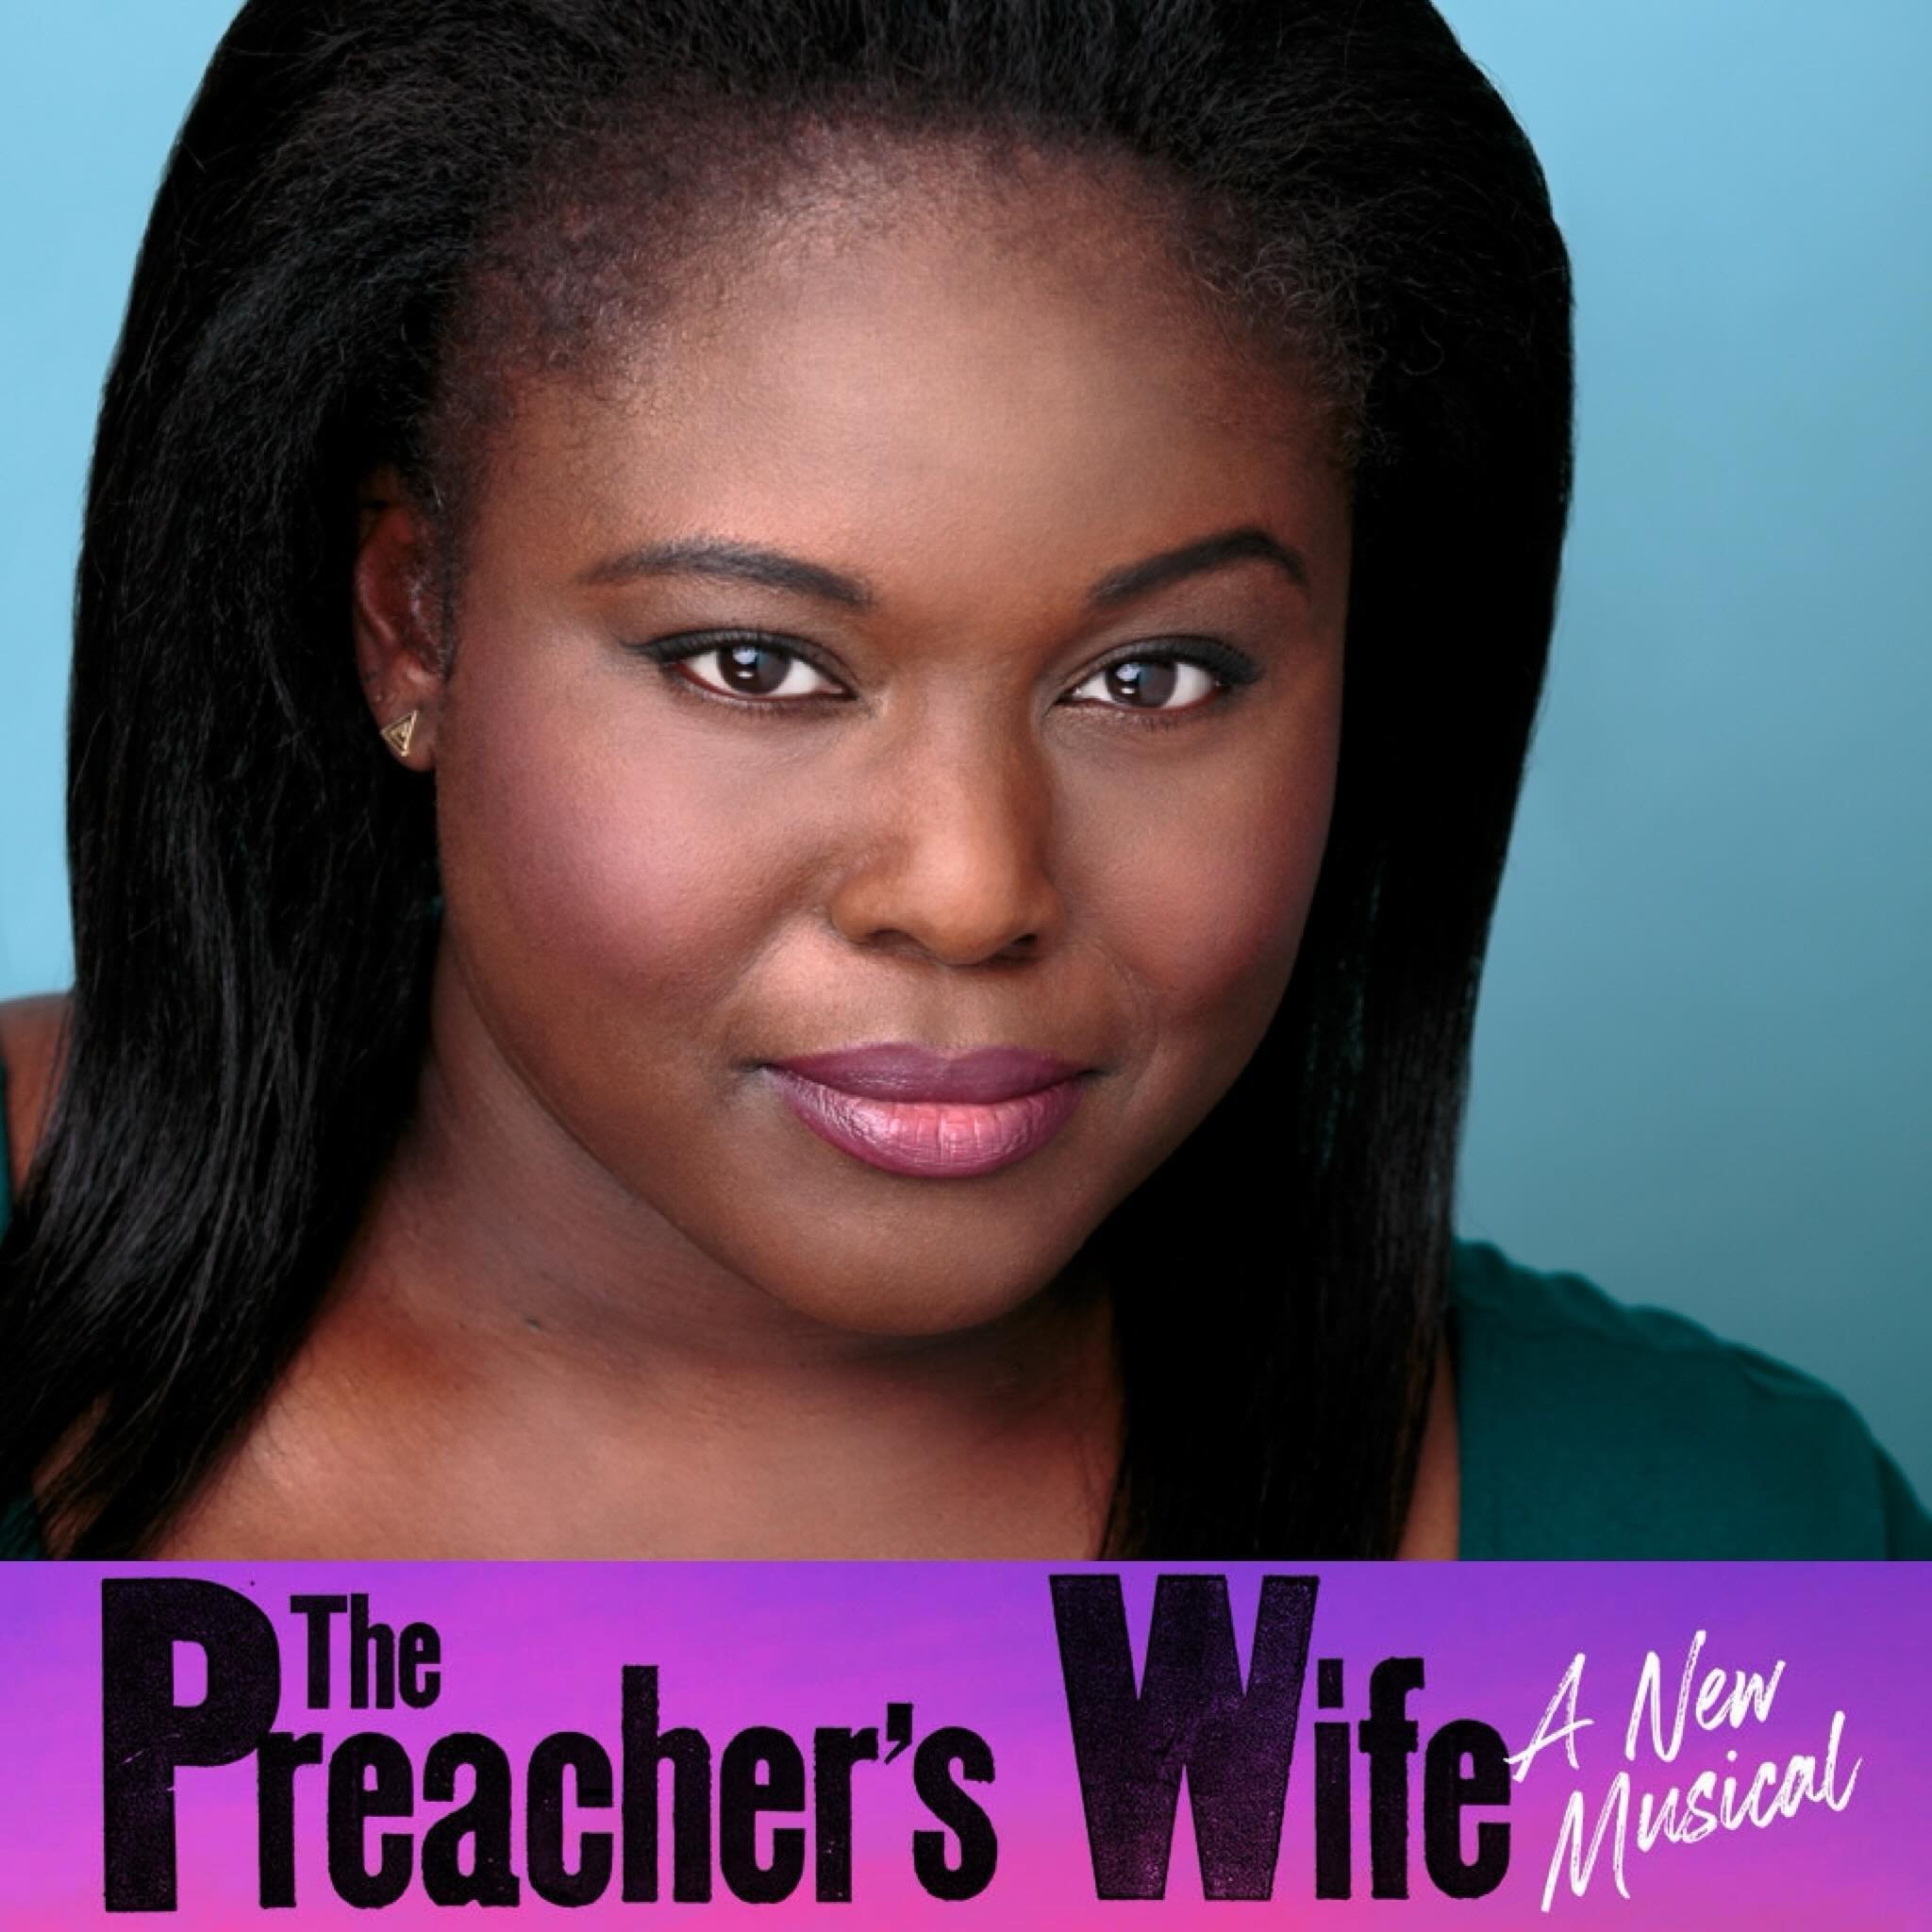 Congratulations to @ammaoseinyc as she opens the world premiere production of THE PREACHER&rsquo;S WIFE tonight at @alliancetheatre! ⭐️

#wamfam